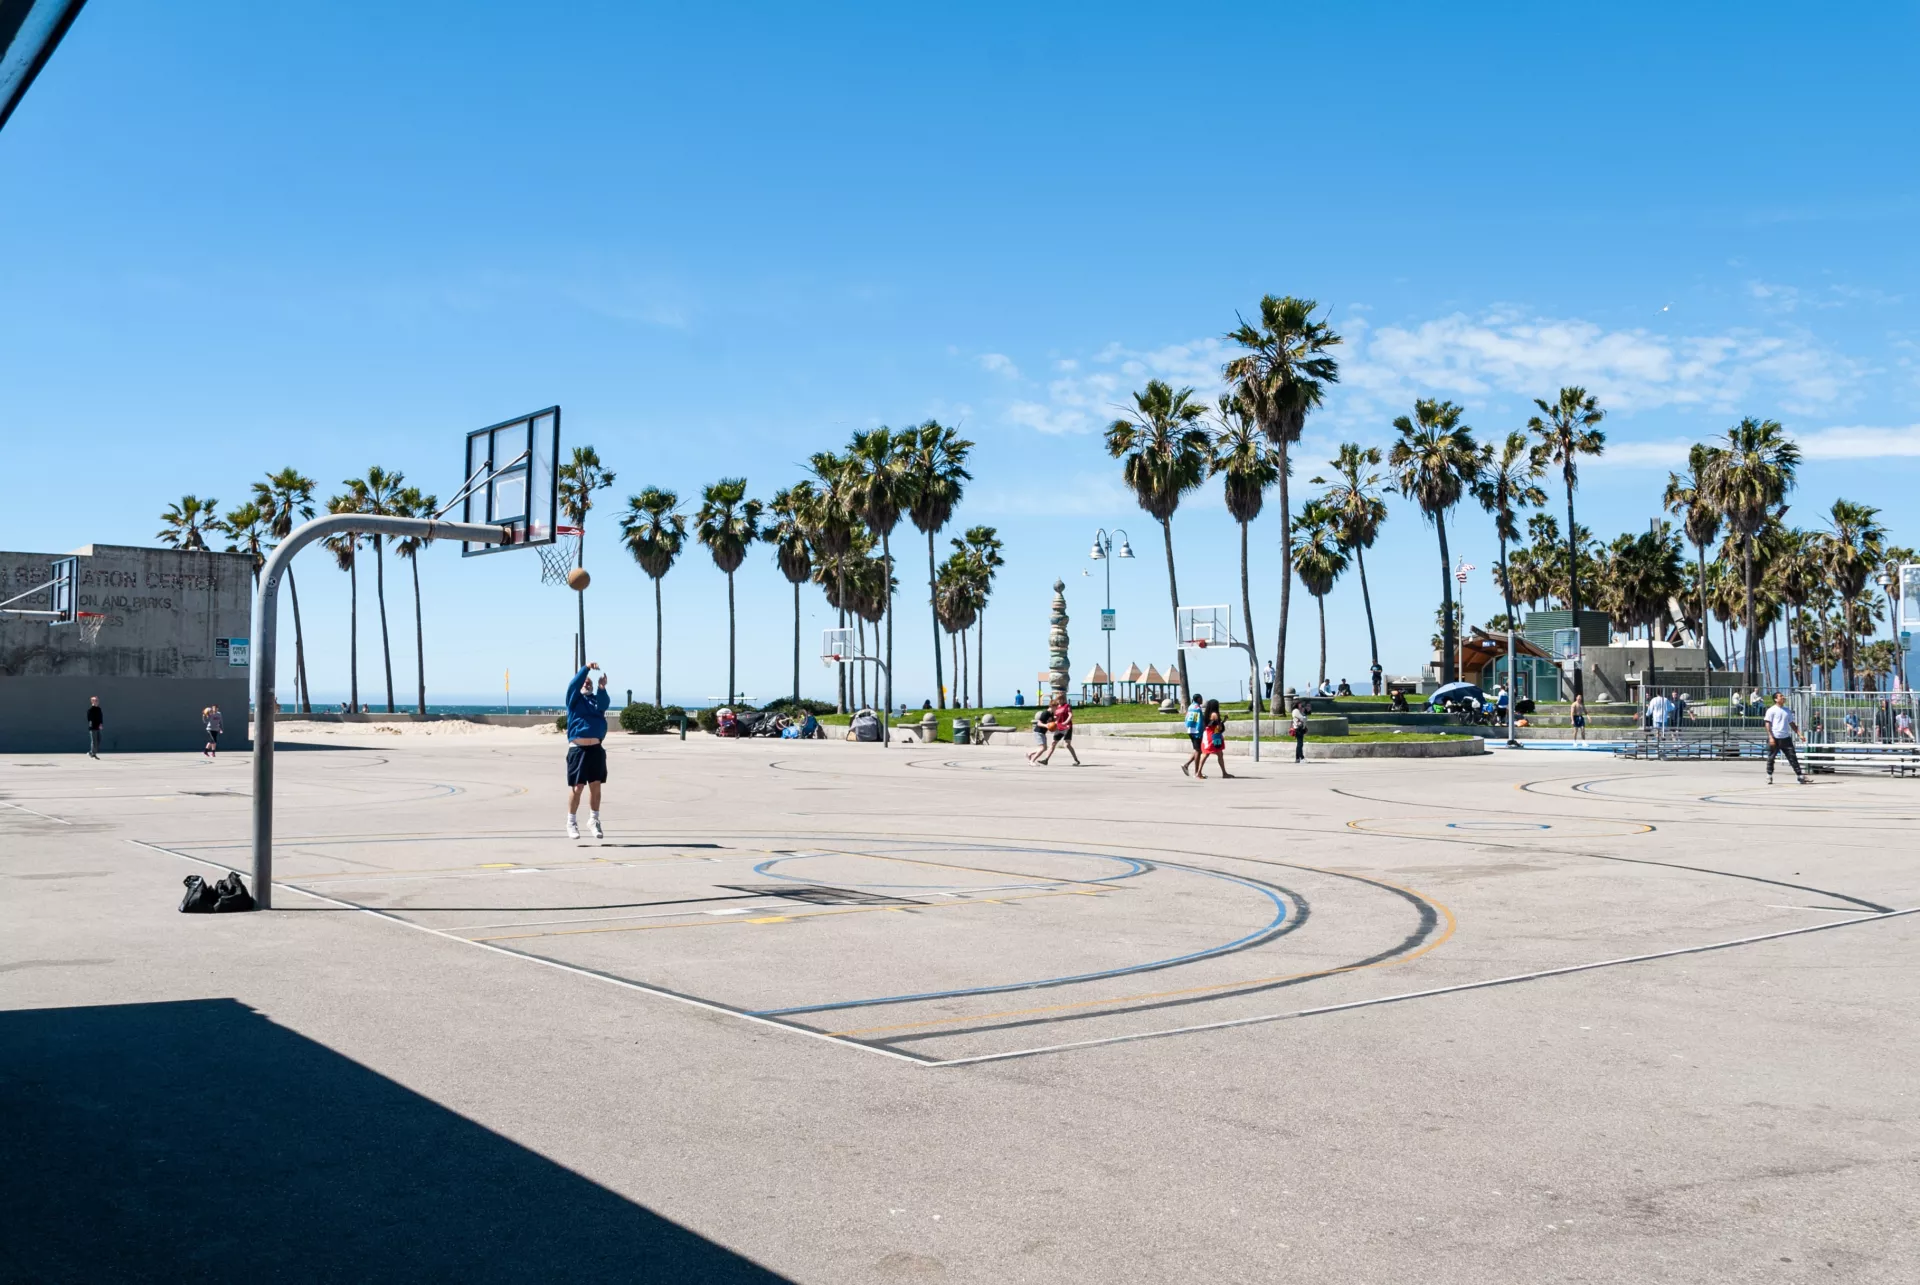 Basketball court surrounded by Palm trees